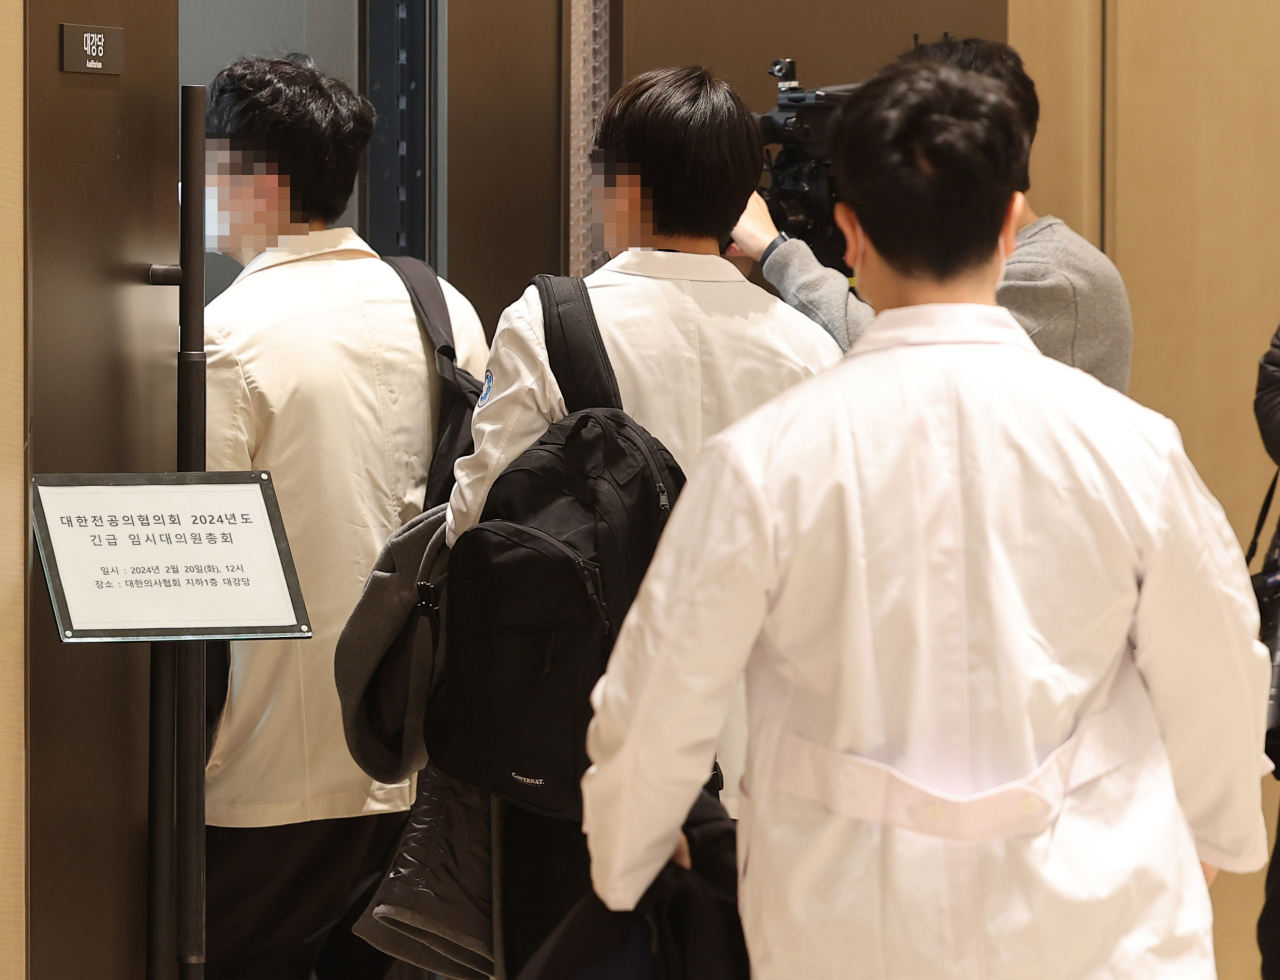 Representatives of trainee doctors, who resigned collectively in protest over a hike in medical school enrollment quotas, gather at the Korea Medical Association building in Seoul on Tuesday. (Yonhap)